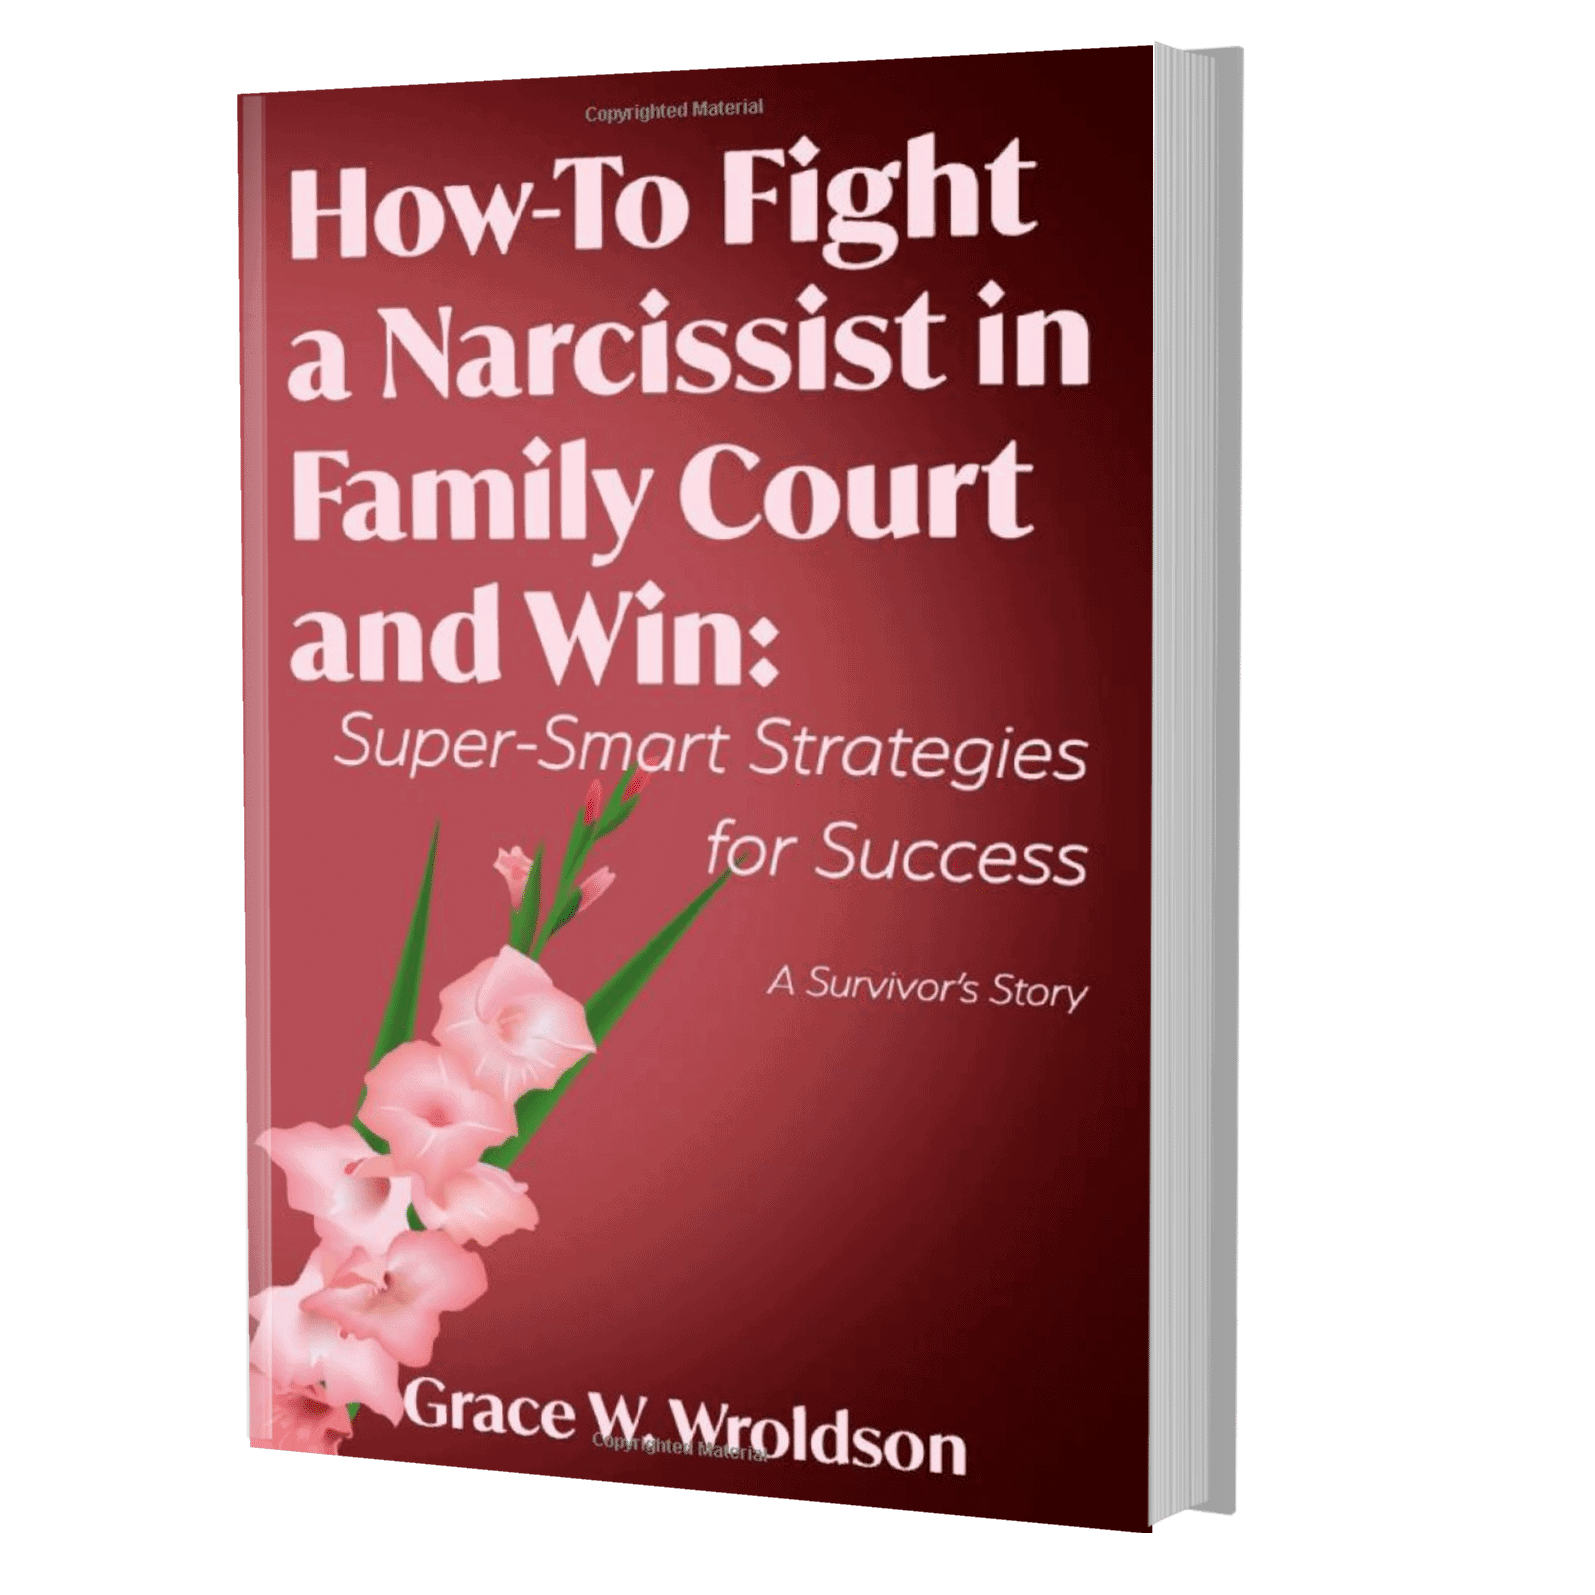 How-To Fight a Narcissist in Family Court and Win